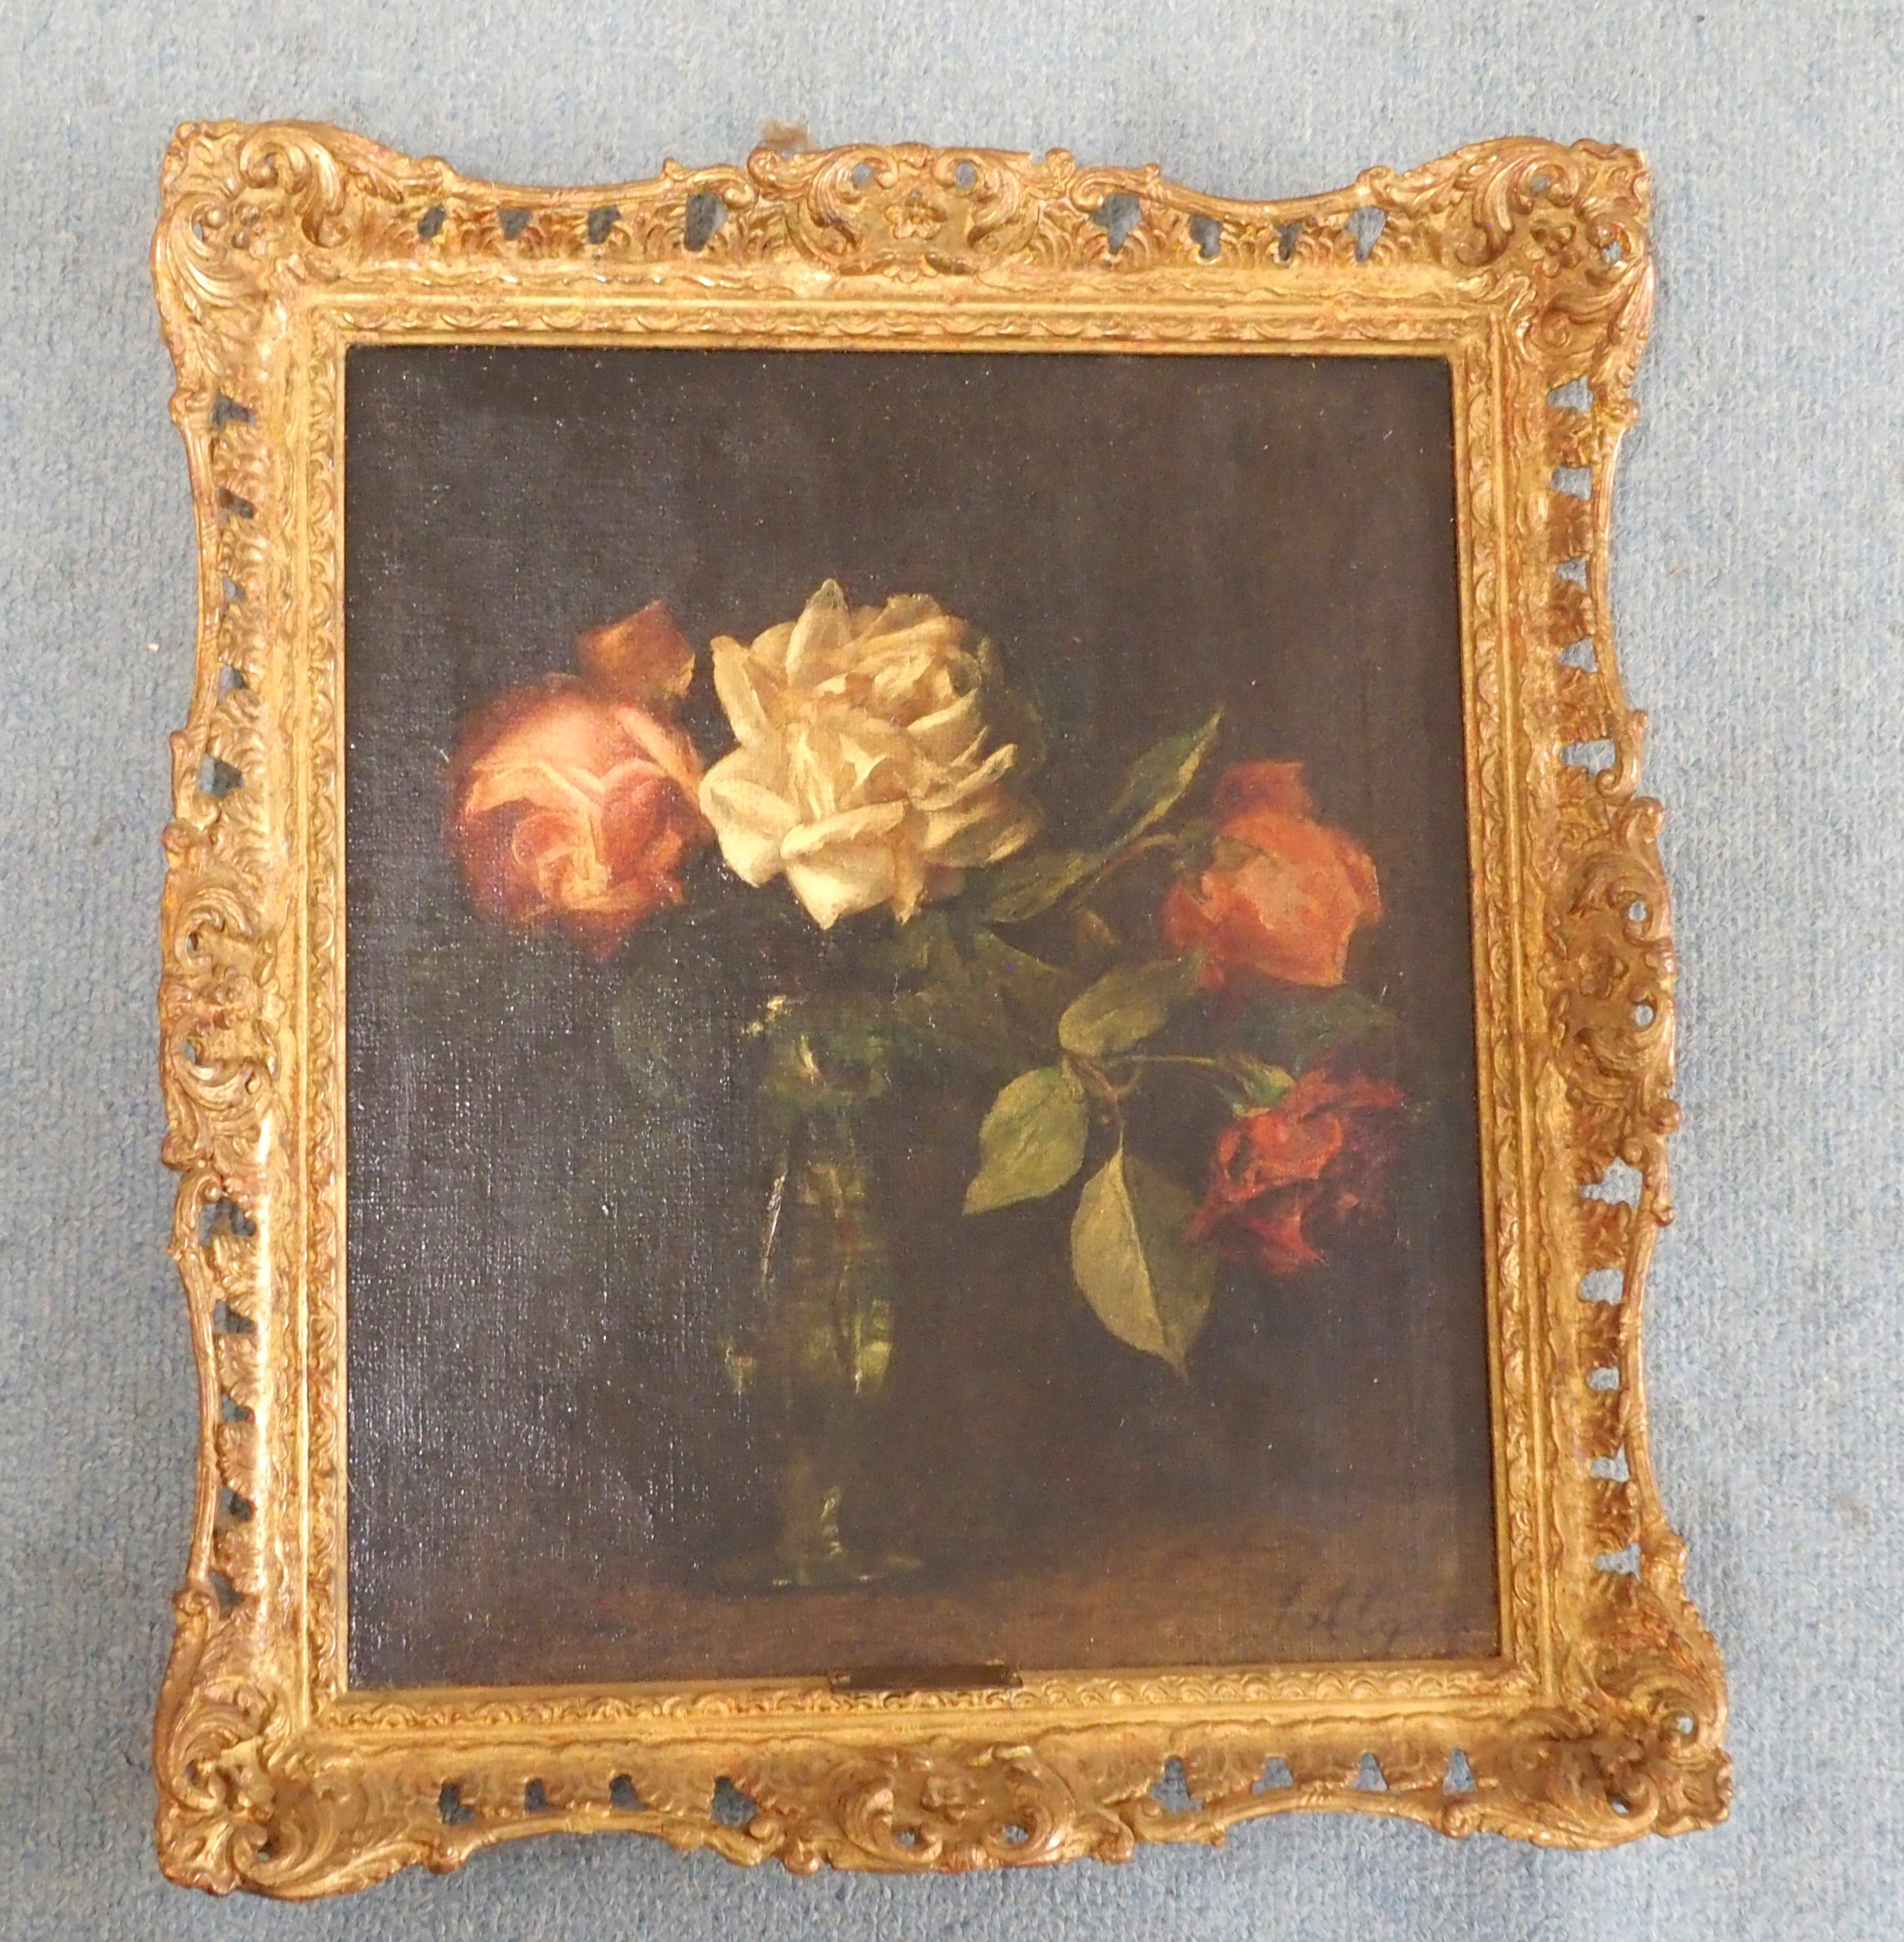 JESSIE ALGIE (SCOTTISH 1859-1927) ROSES IN A GLASS VASE Oil on canvas, signed, 35.5 x 30.5cm (14 x - Image 3 of 7